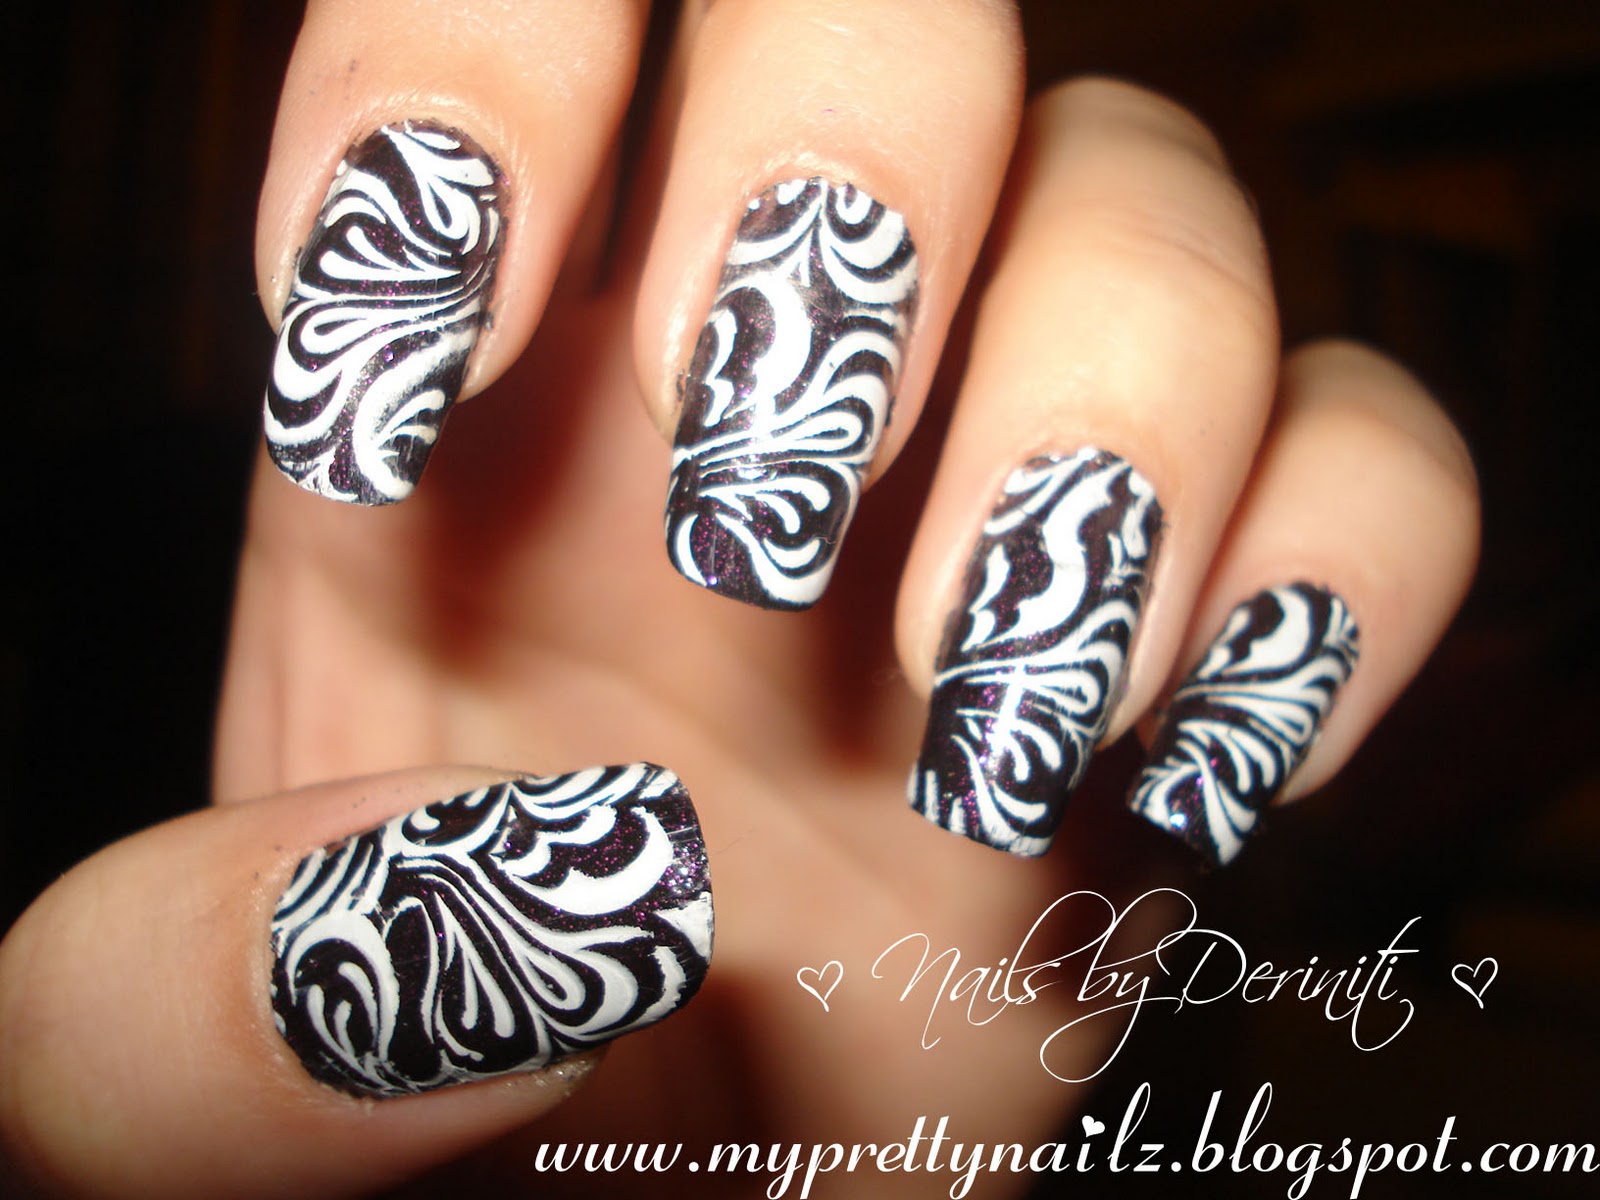 4. Black and White Nail Art Experts for Hire - wide 8